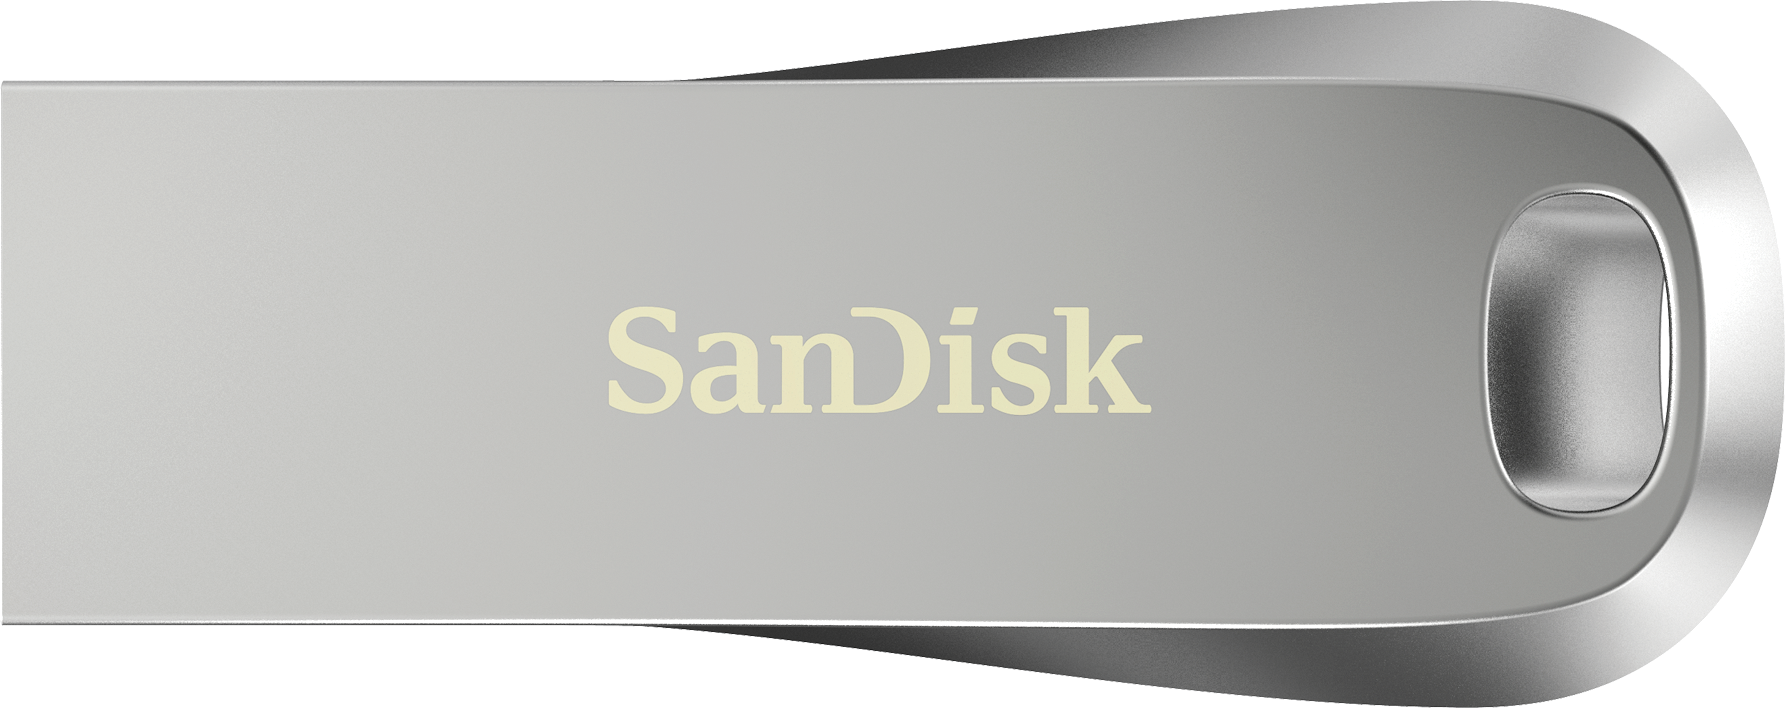 sandisk secure access will not install